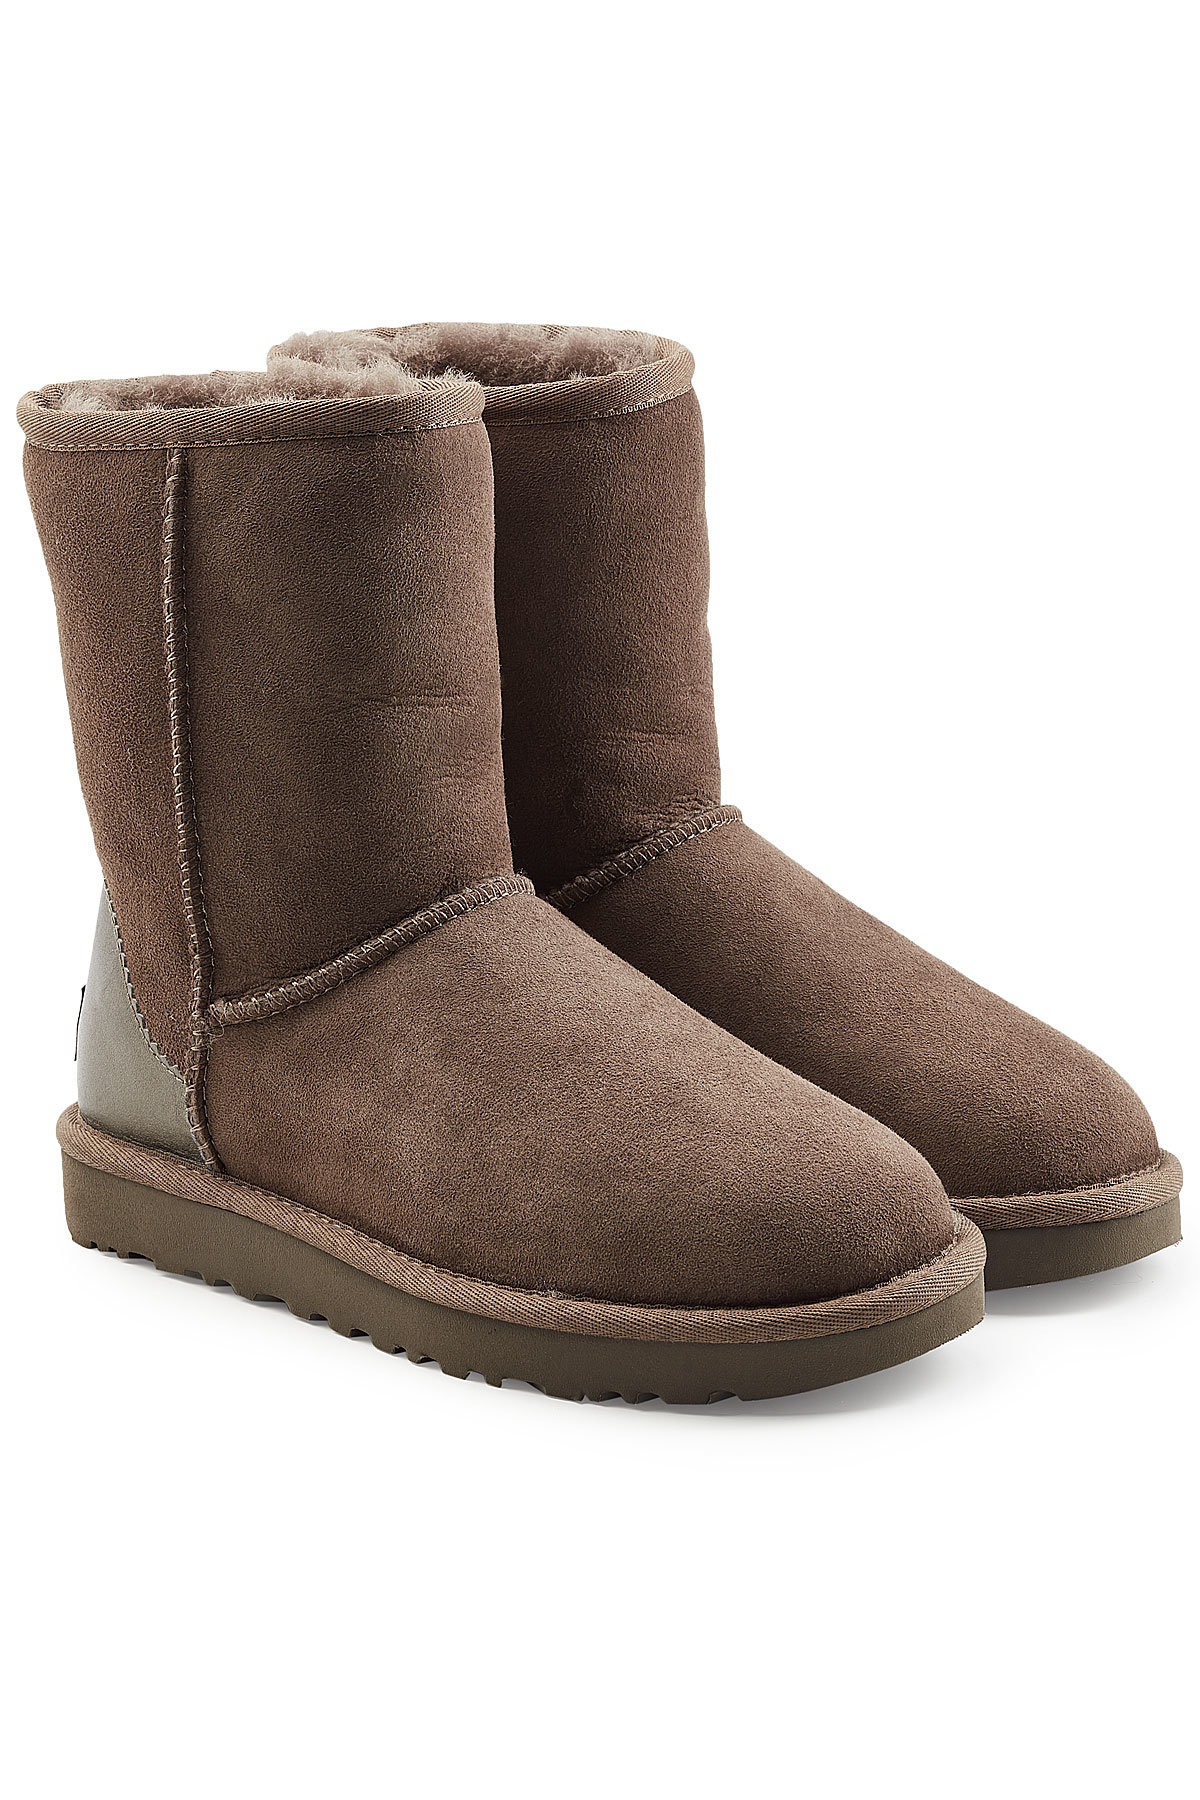 UGG Australia - Classic Short Suede Boots with Metallic Detail